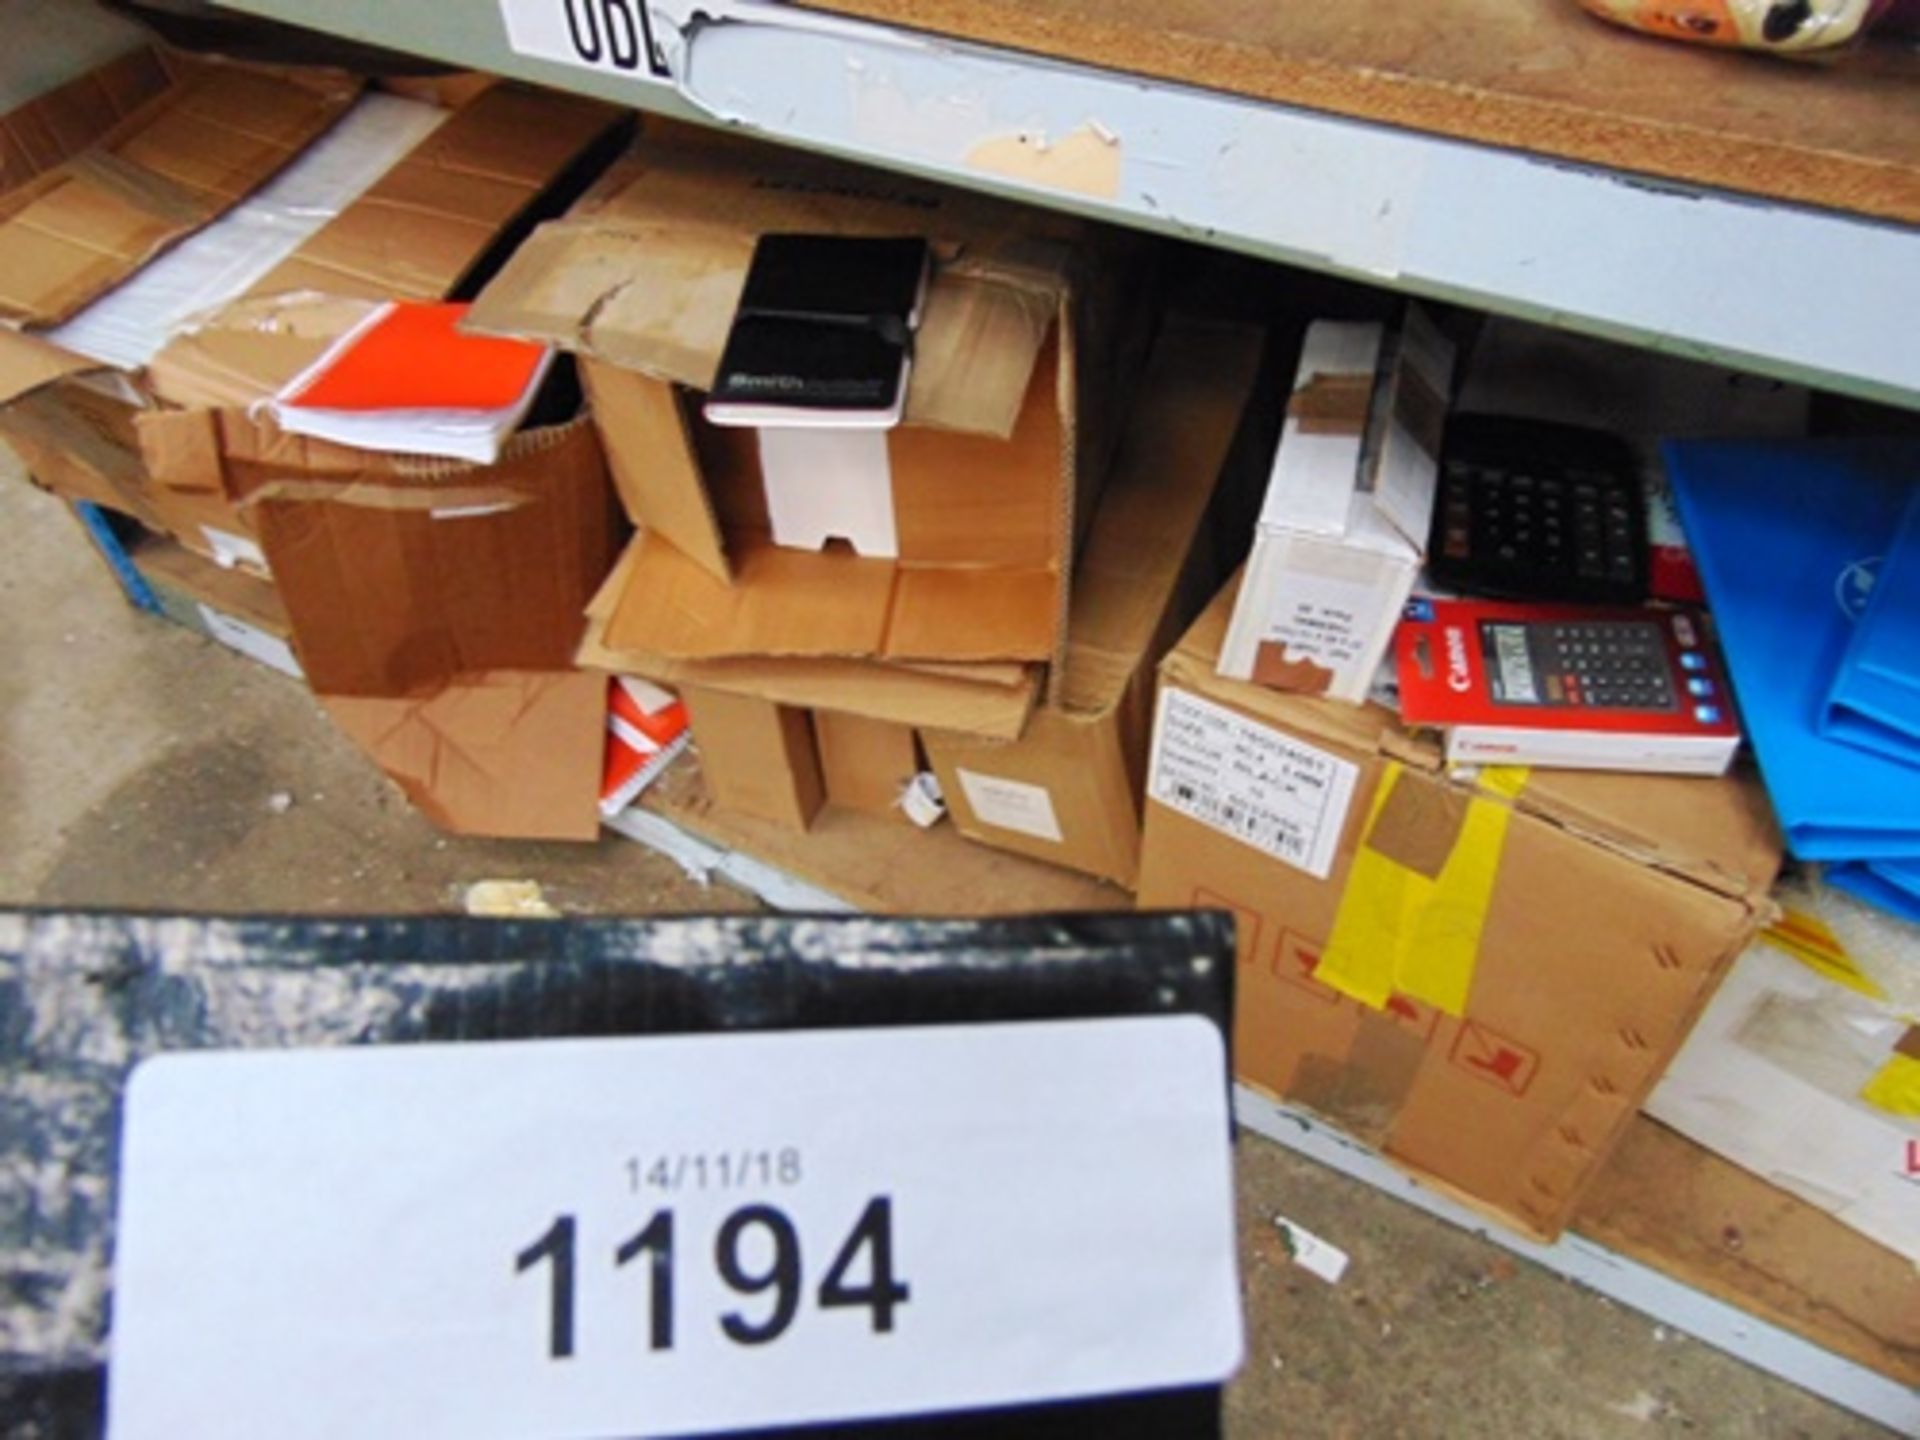 A shelf of stationery items including C4 Peal & Seals envelopes, notepads, calculators etc. -